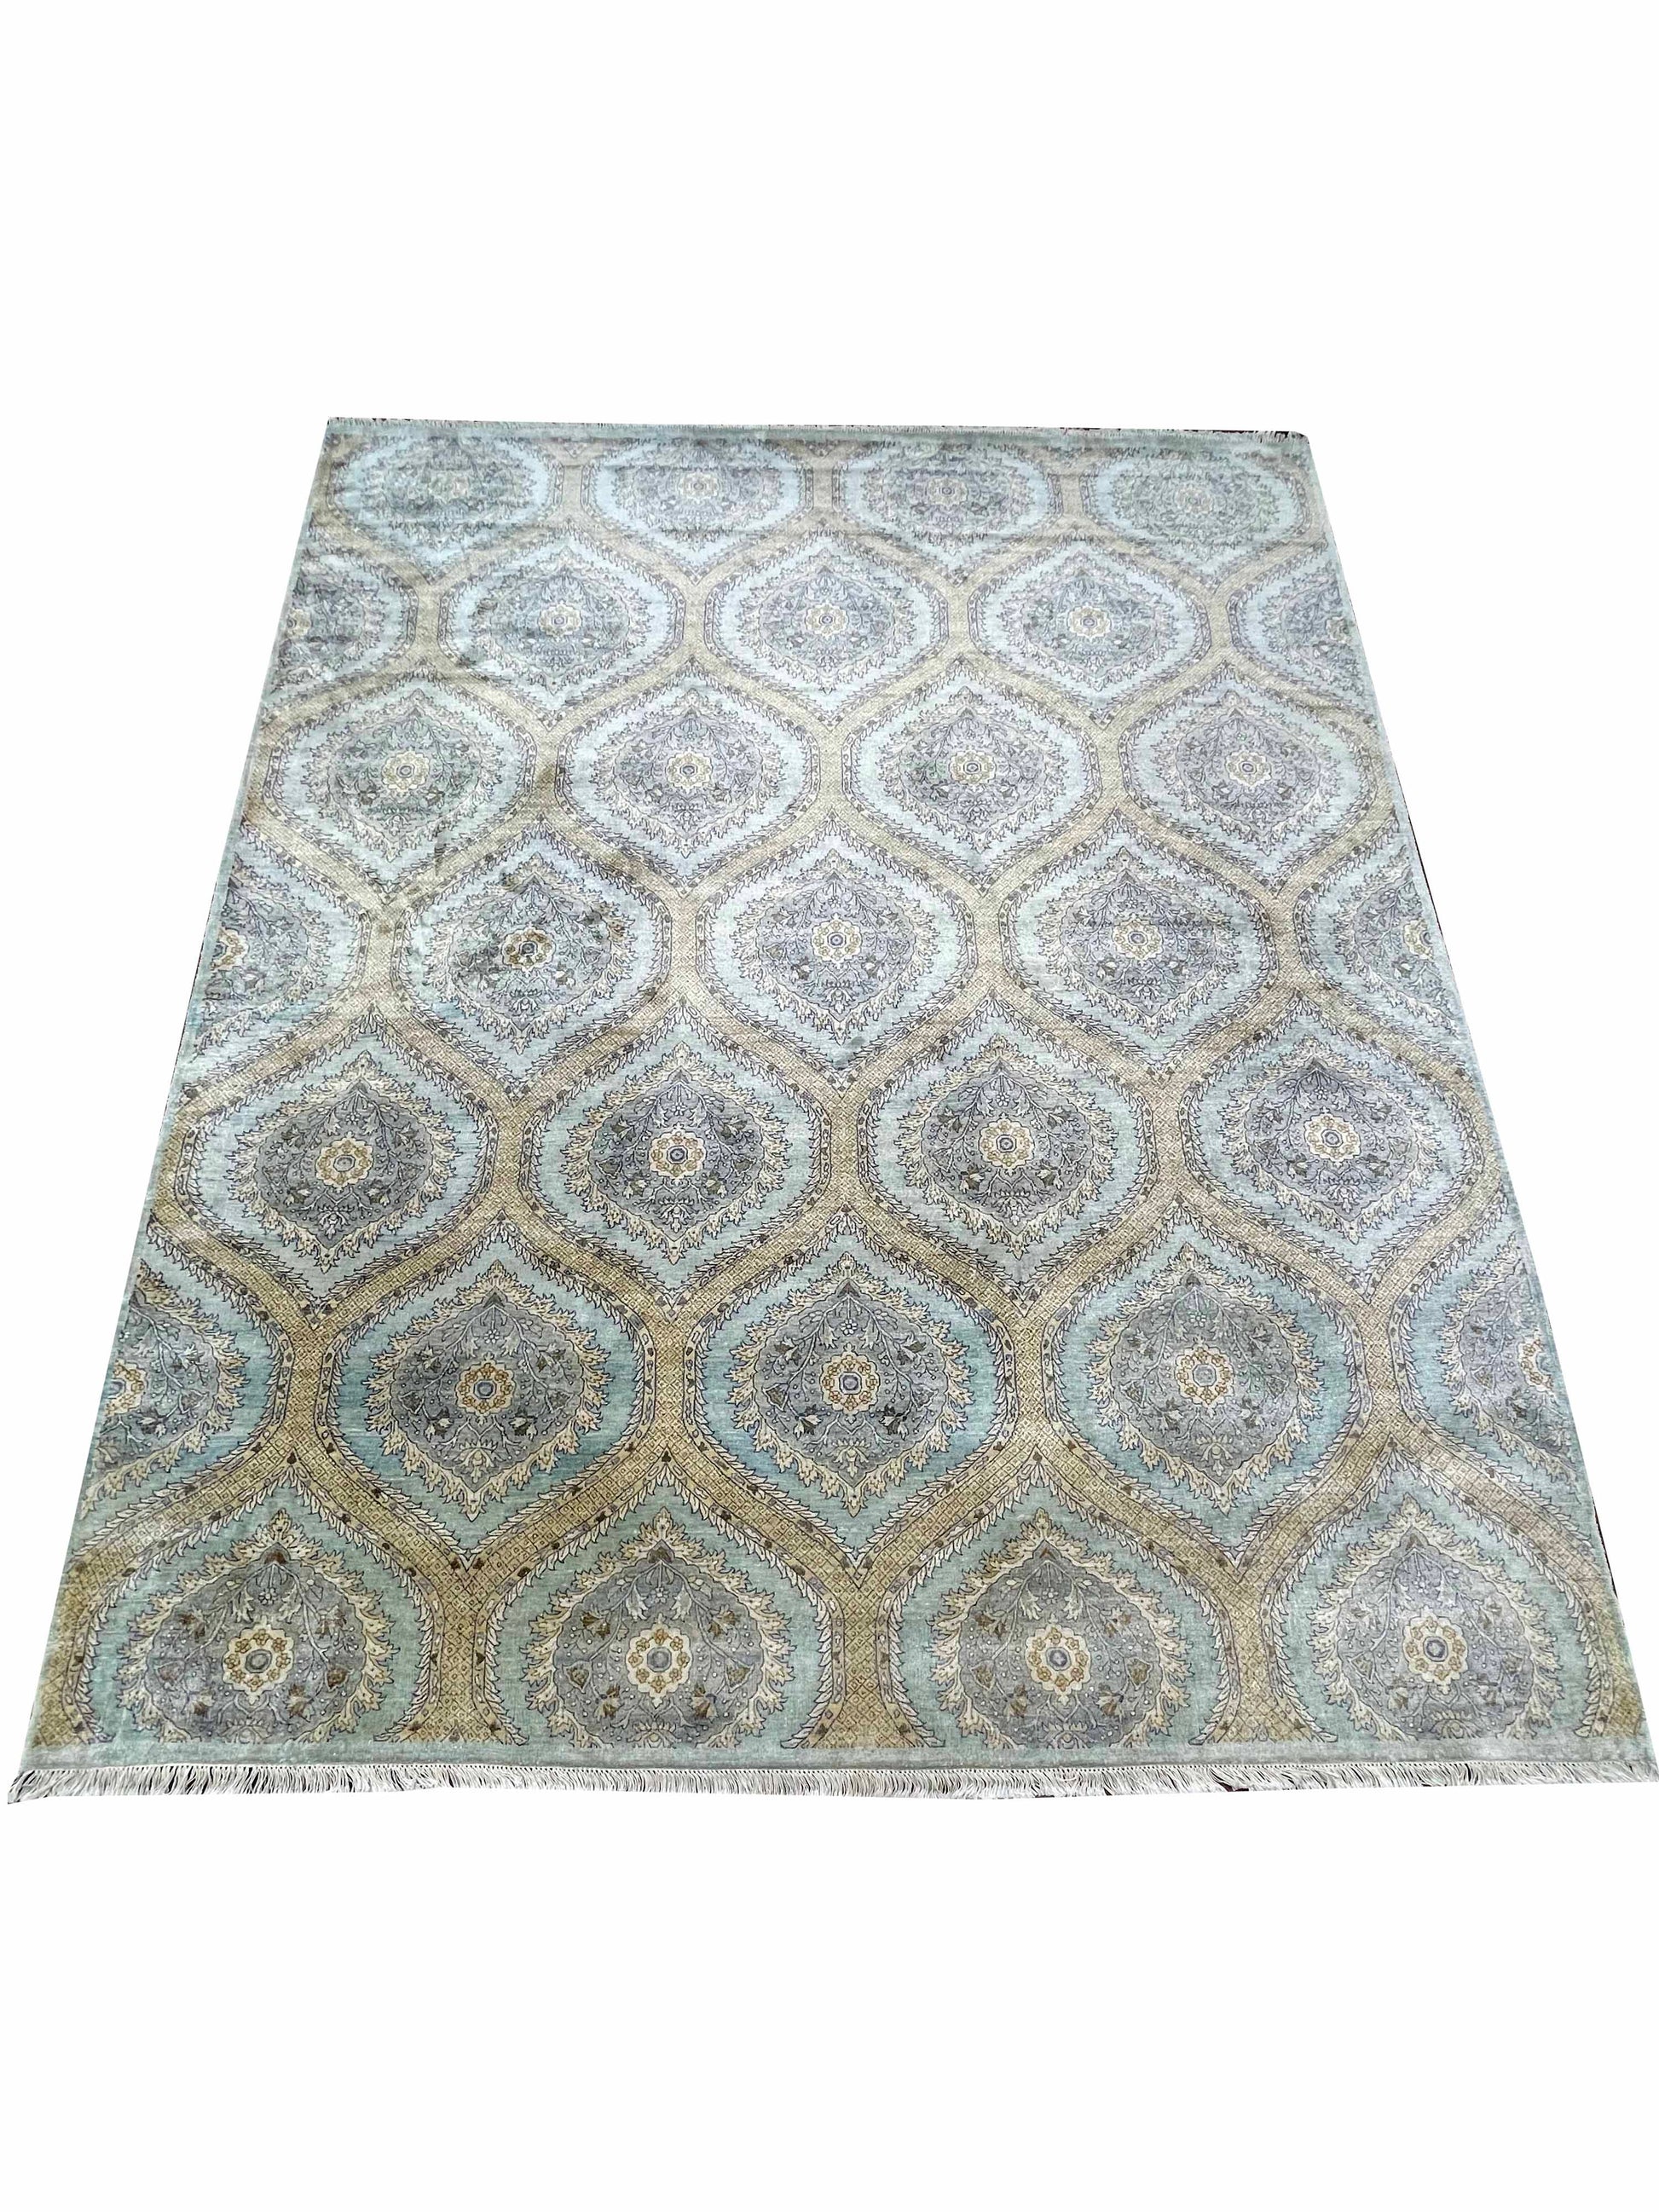 Get trendy with L.blue and Camel Pure Silk Ethnic Handknotted Area Rug  8.1x10.0ft 246x305cms - Traditional Rugs available at Jaipur Oriental Rugs. Grab yours for $5820.00 today!